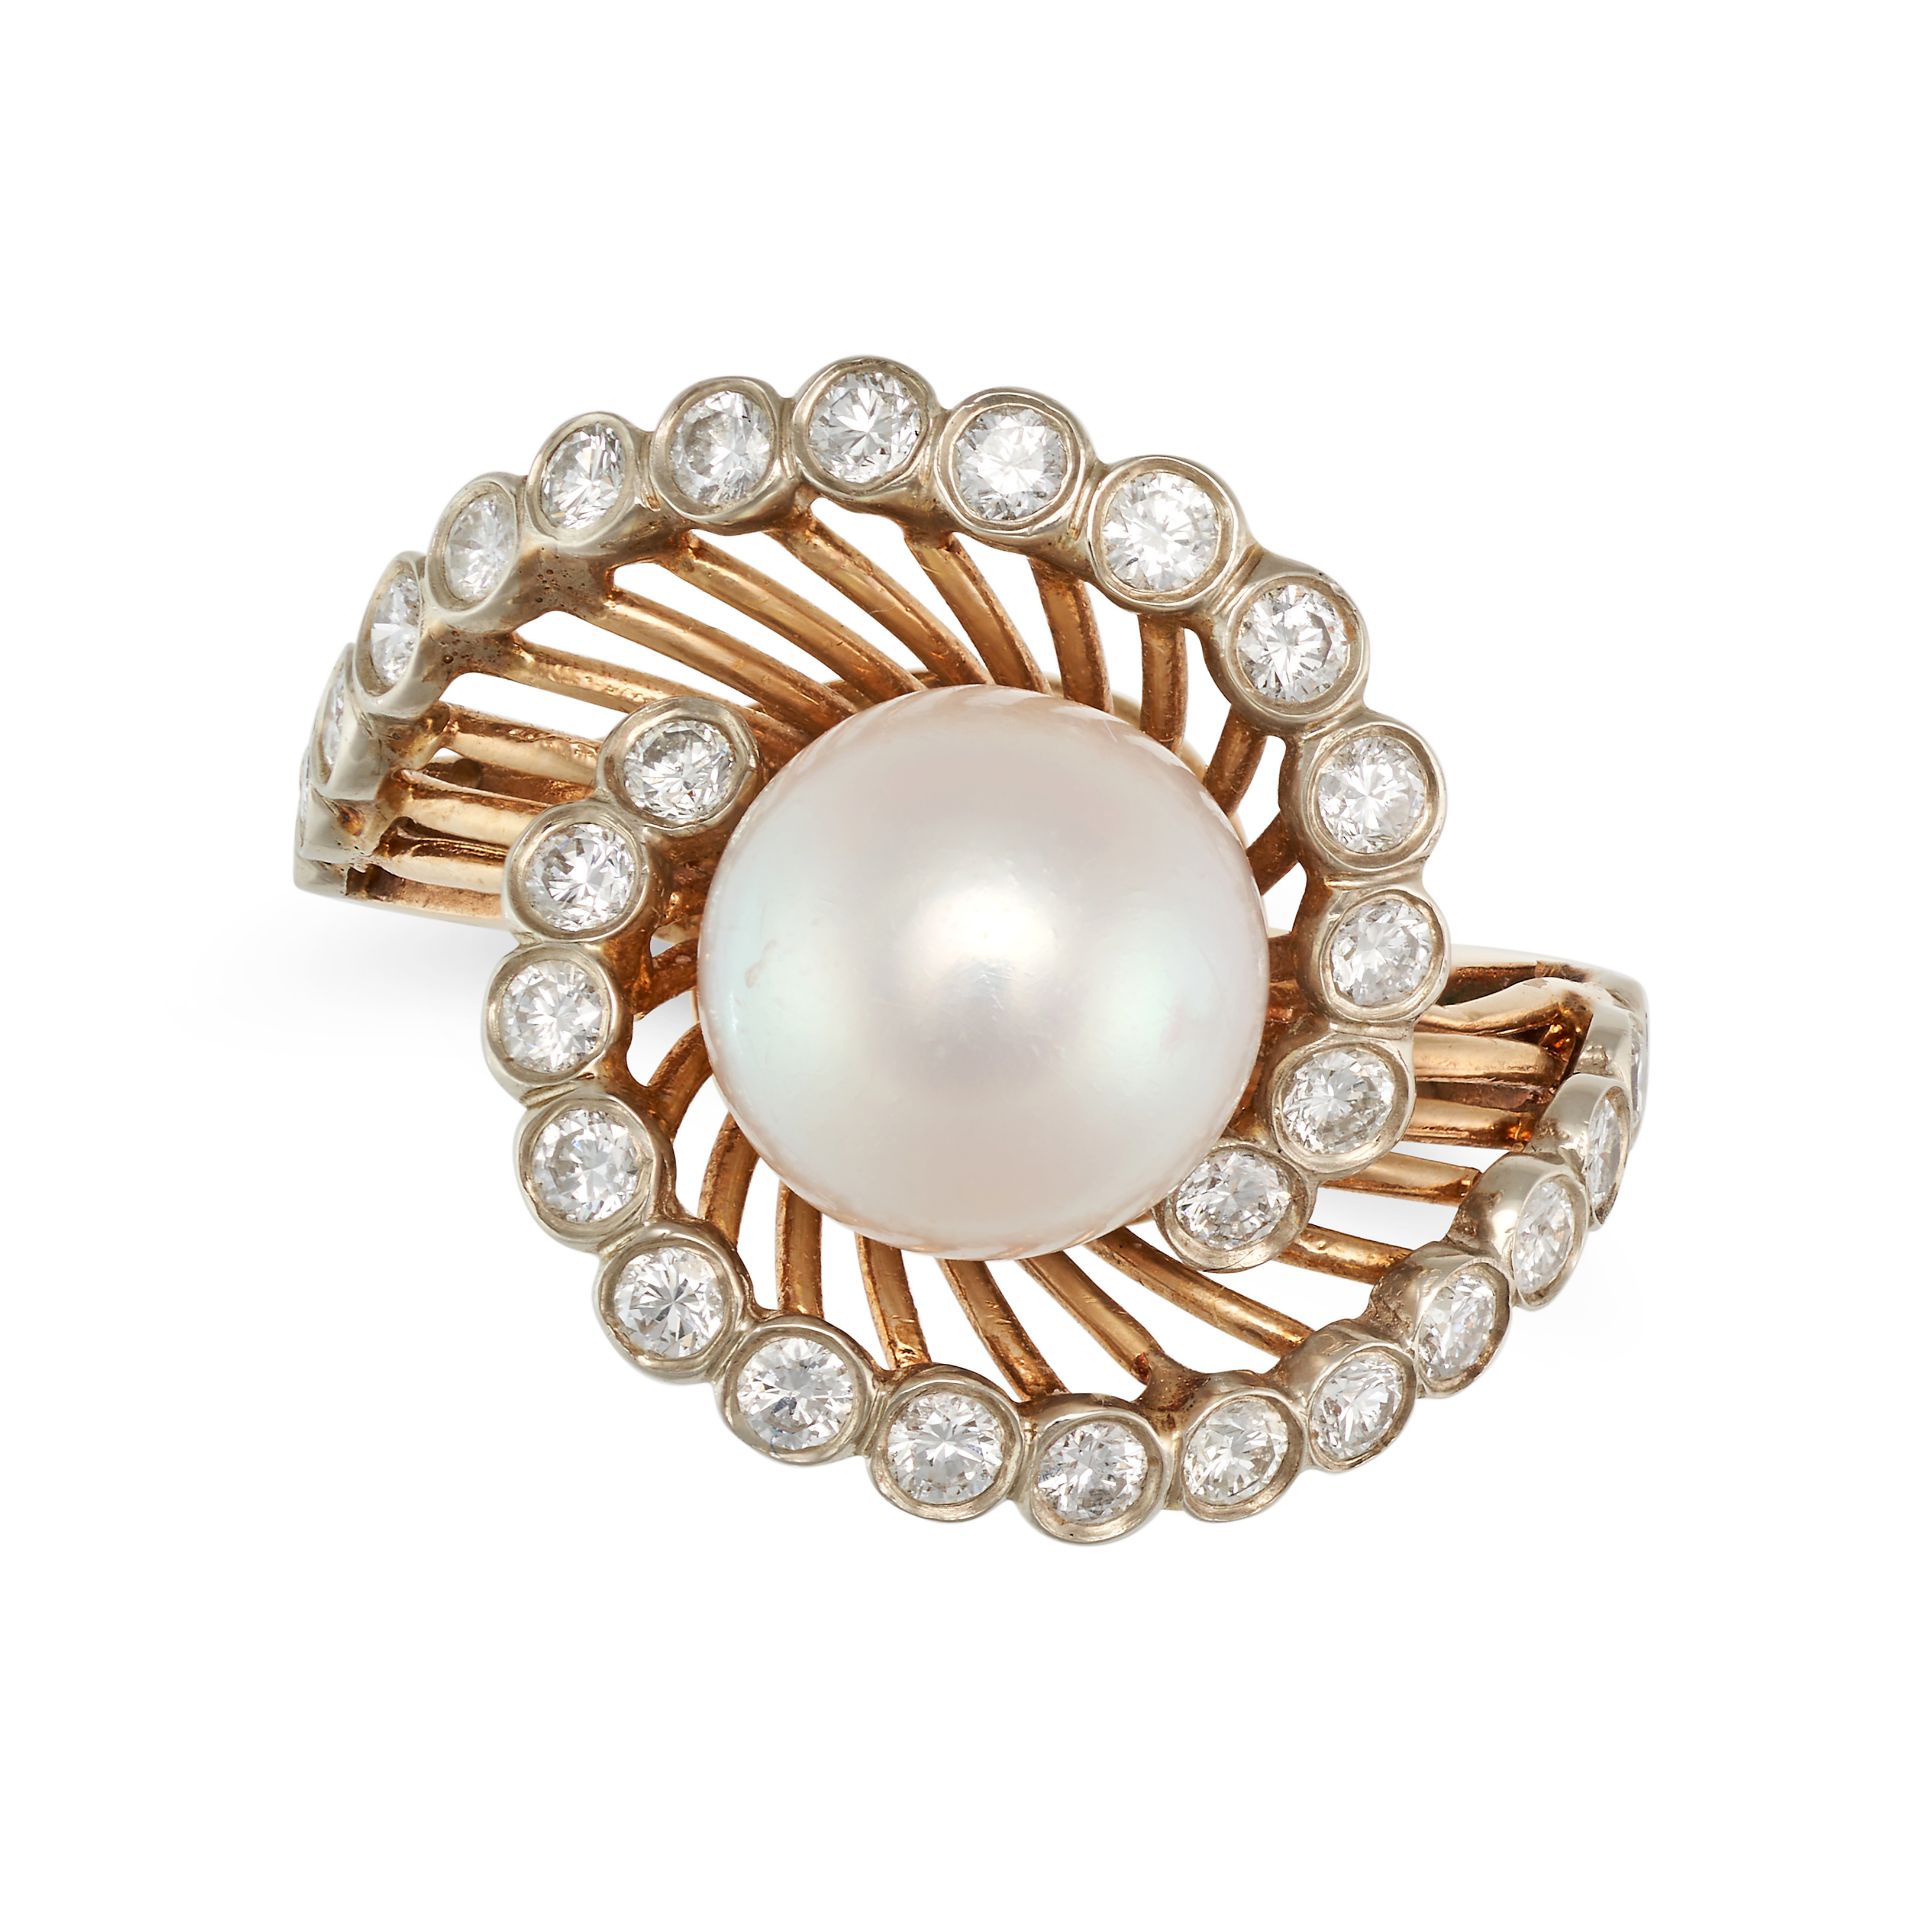 A PEARL AND DIAMOND RING set with a pearl of 8.8mm accented by round brilliant cut diamonds, stam...